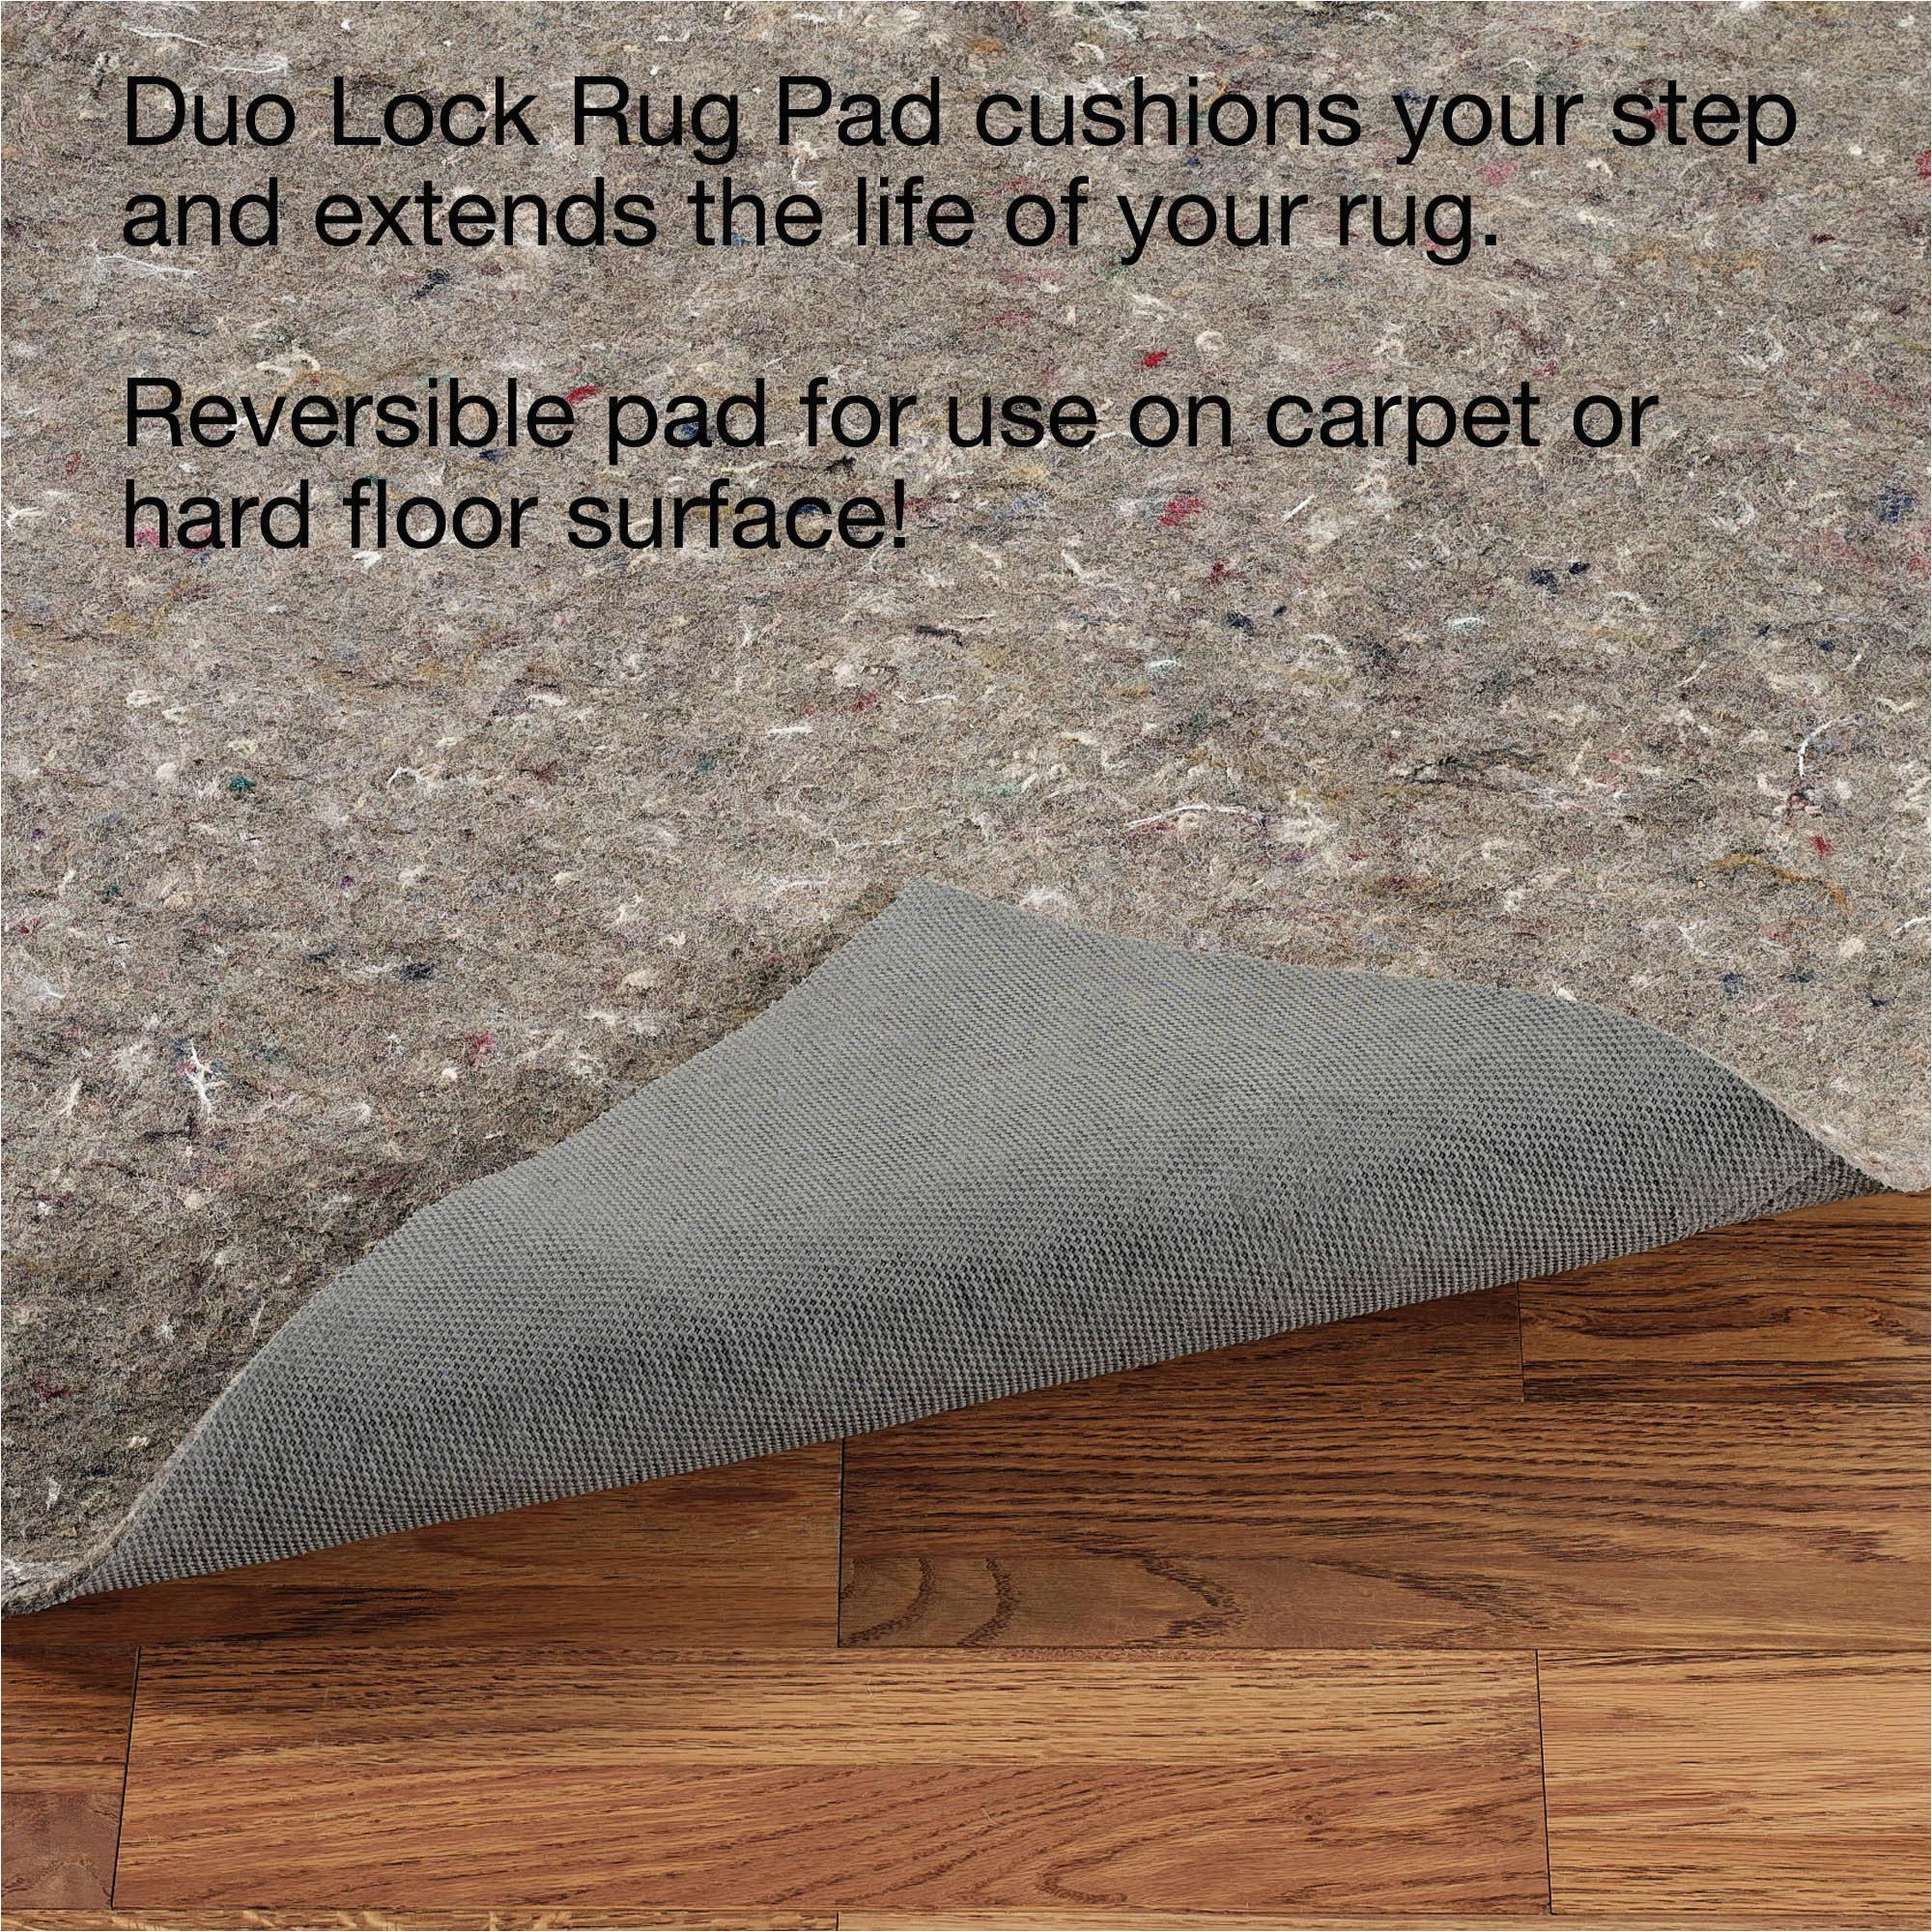 Do area Rugs Need A Pad What’s the Deal with Rug Pads: Necessary or Not? Blog